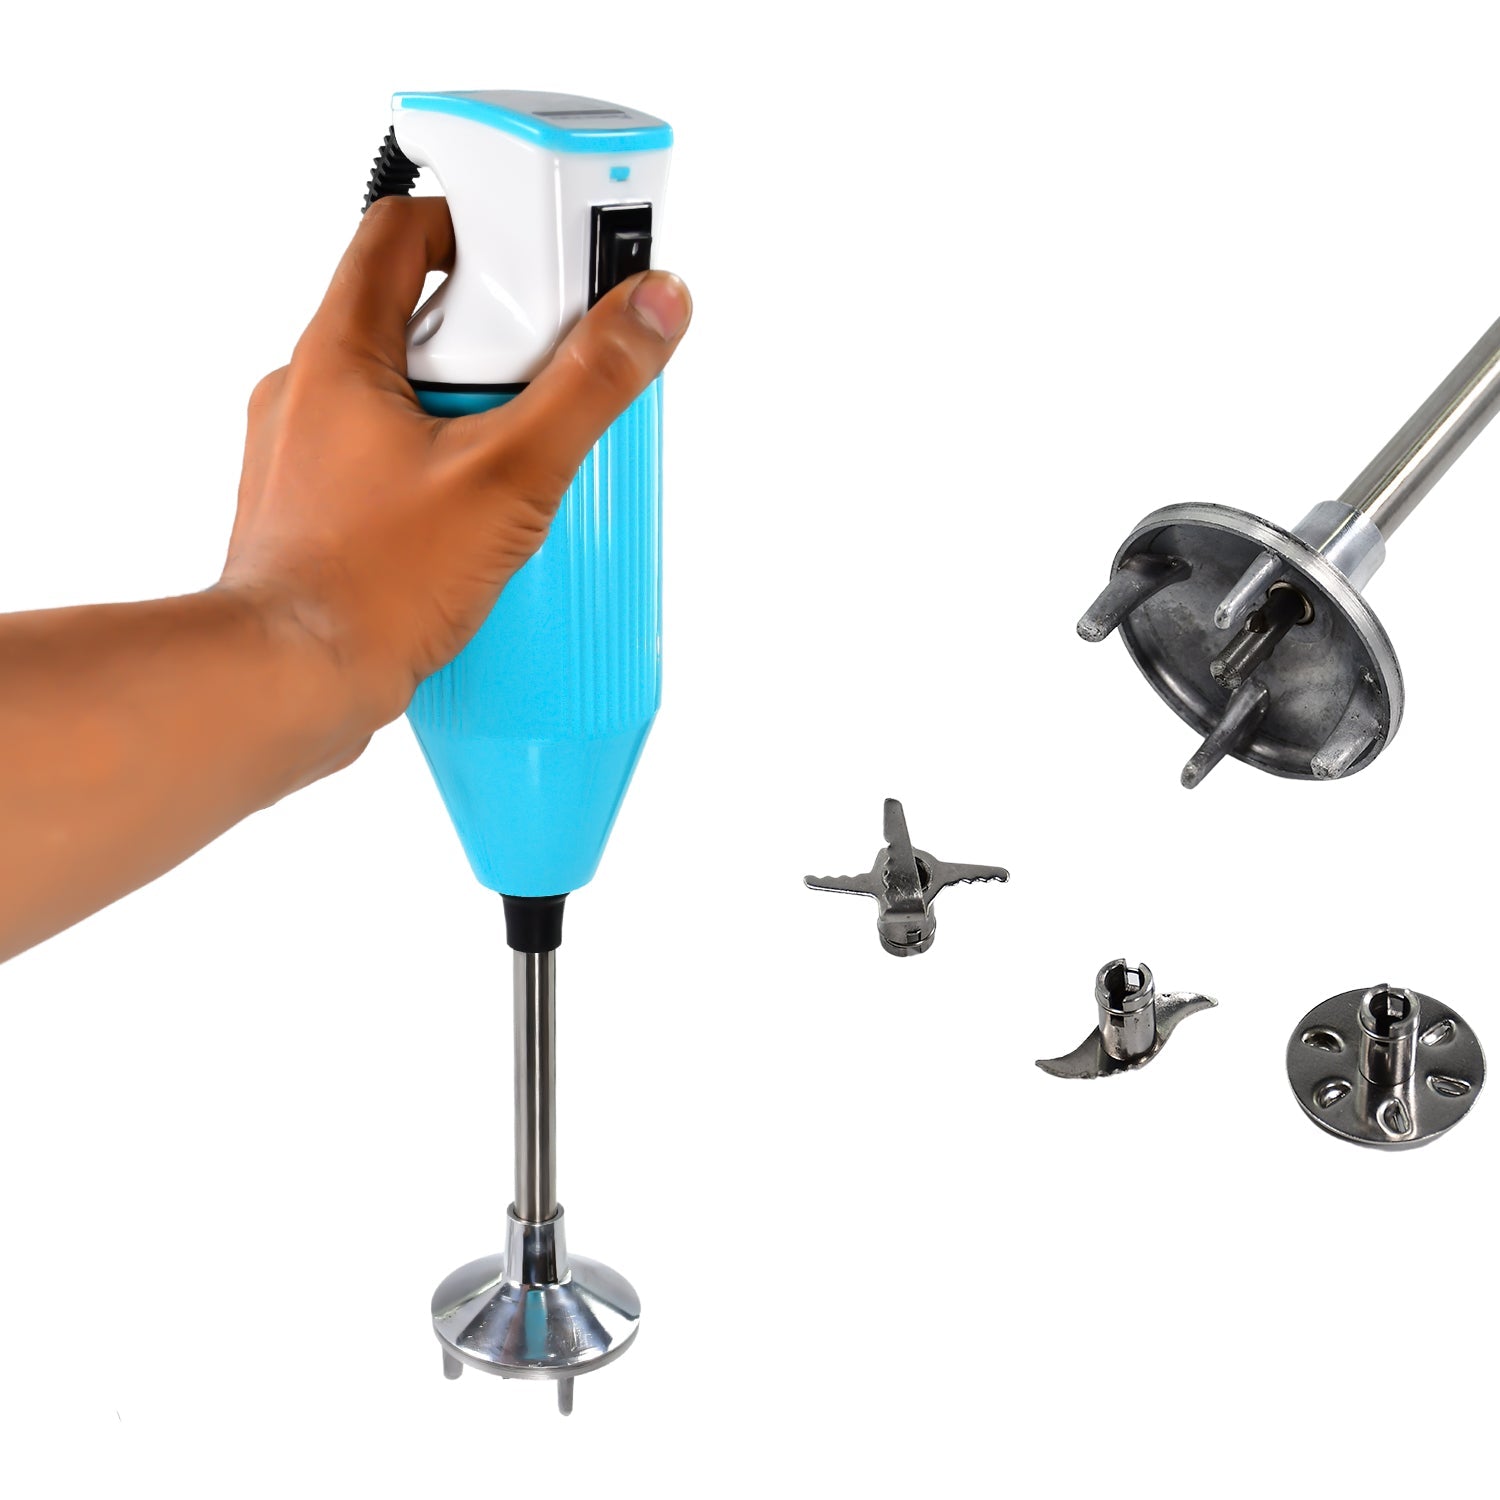 2900 Portable Hand Blender Stainless Steel with dual speed & multi attachment Egg Beater blending Coffee Lassi Salad Juice Buttermilk maker Home office pantry canteen kitchen chef use DeoDap